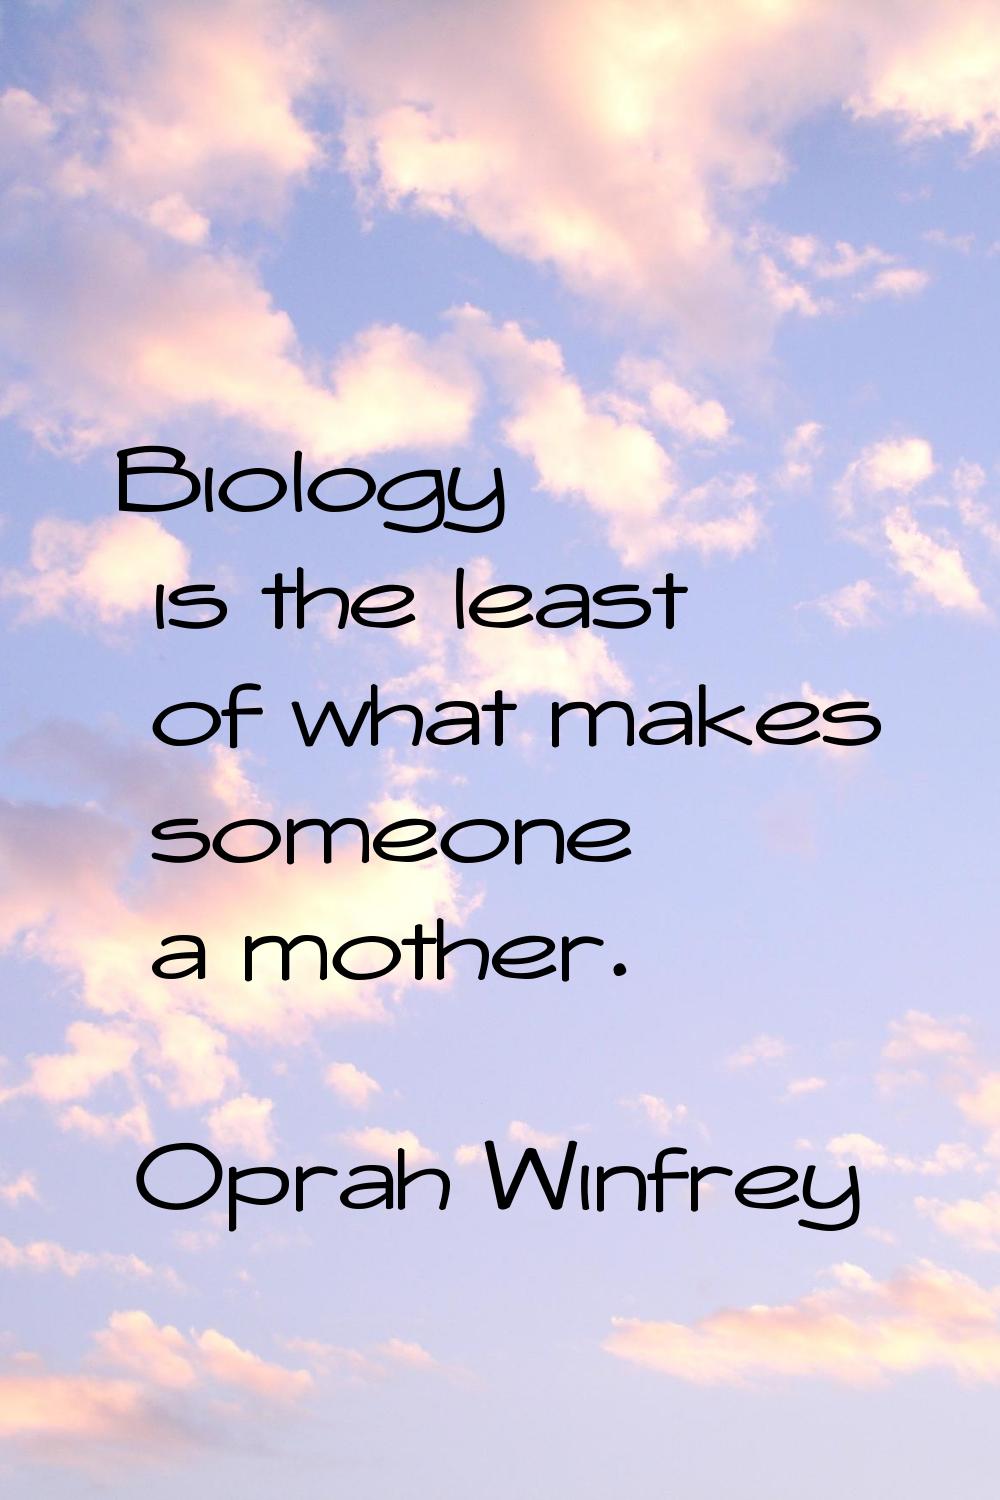 Biology is the least of what makes someone a mother.